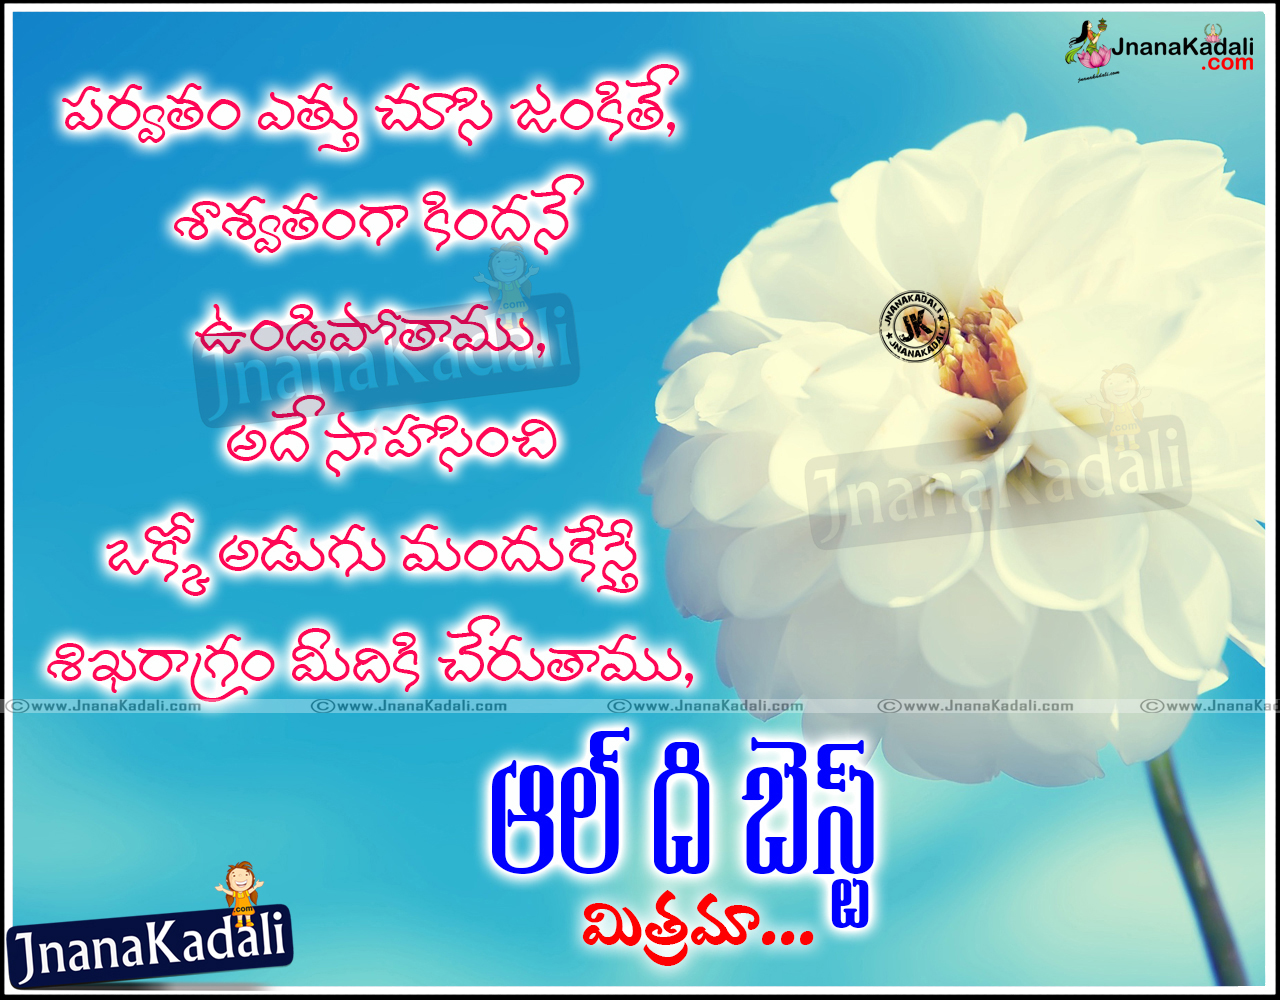 Telugu Quotations And Greetings Wishes For All The Best Jnana